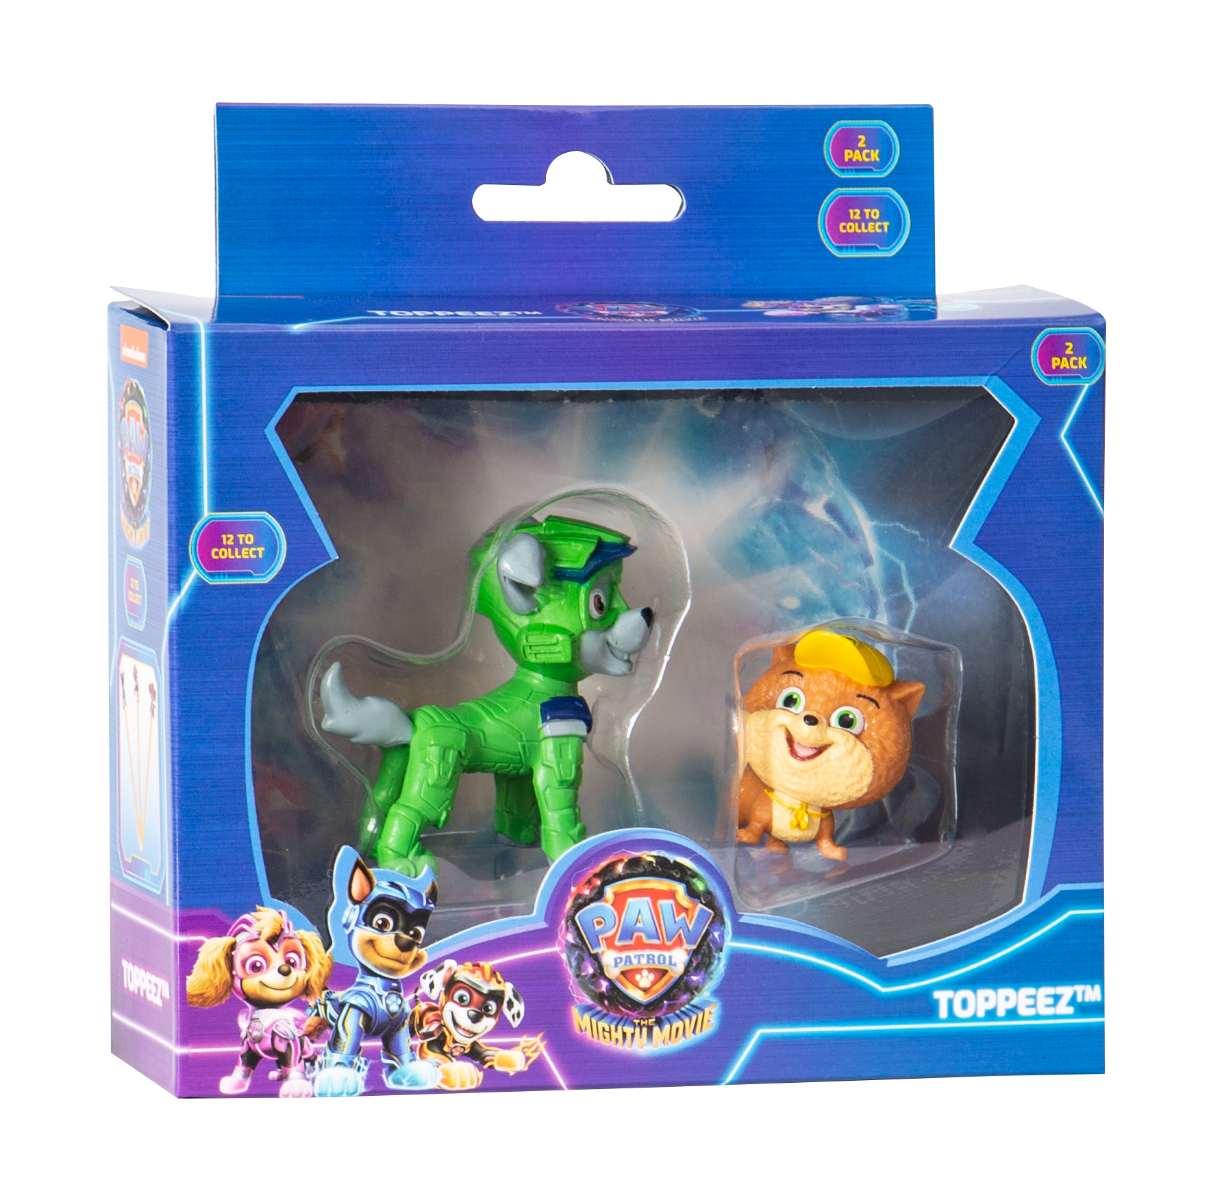 Paw Patrol: The Mighty Movie Pencil Toppers - Pack of 2  (Assorted)